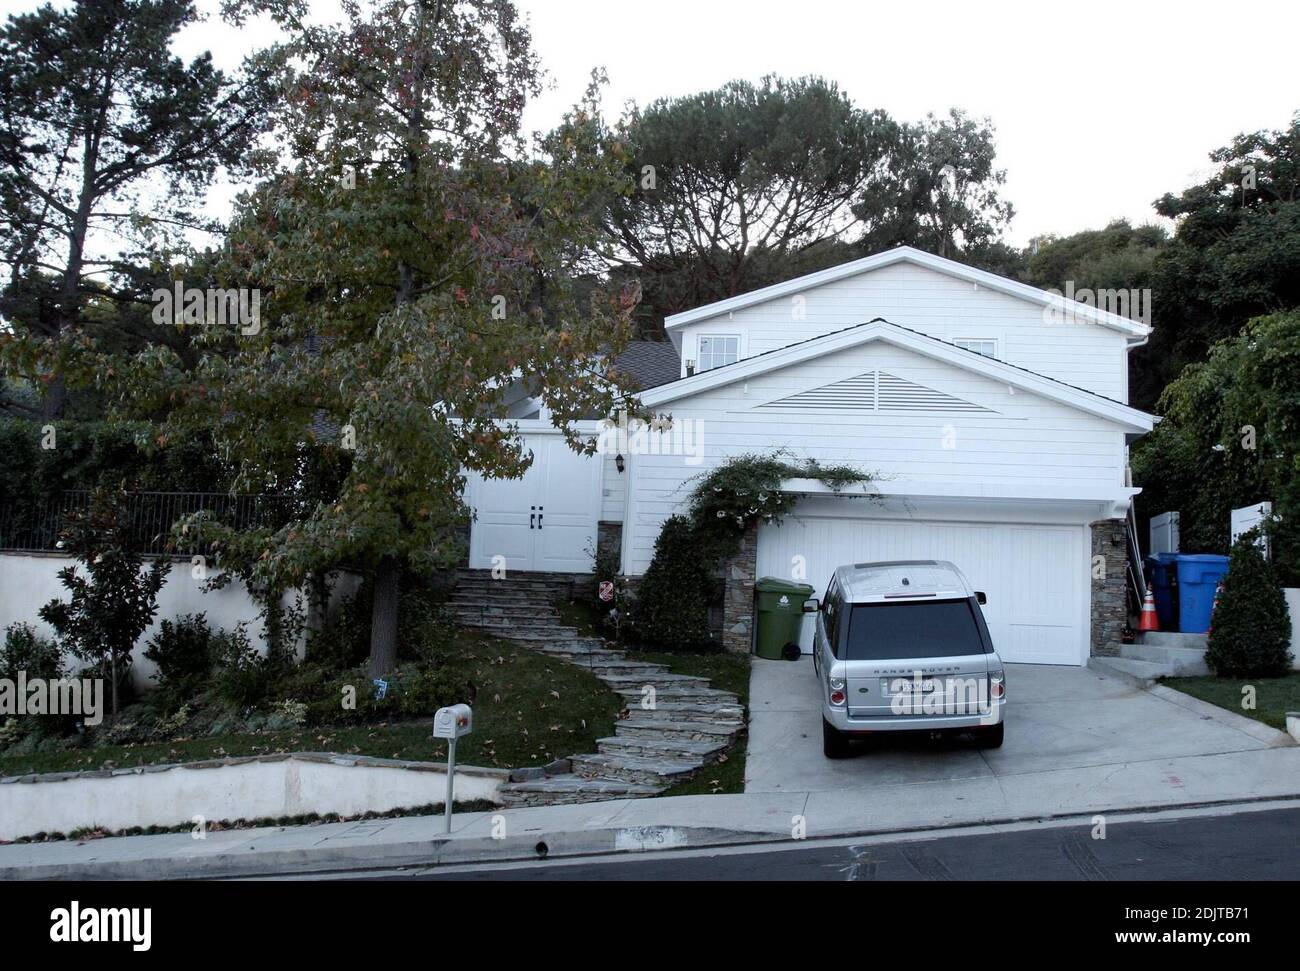 Kate Beckinsale's new mansion in Brentwood, Ca. 11/19/06 Stock Photo - Alamy